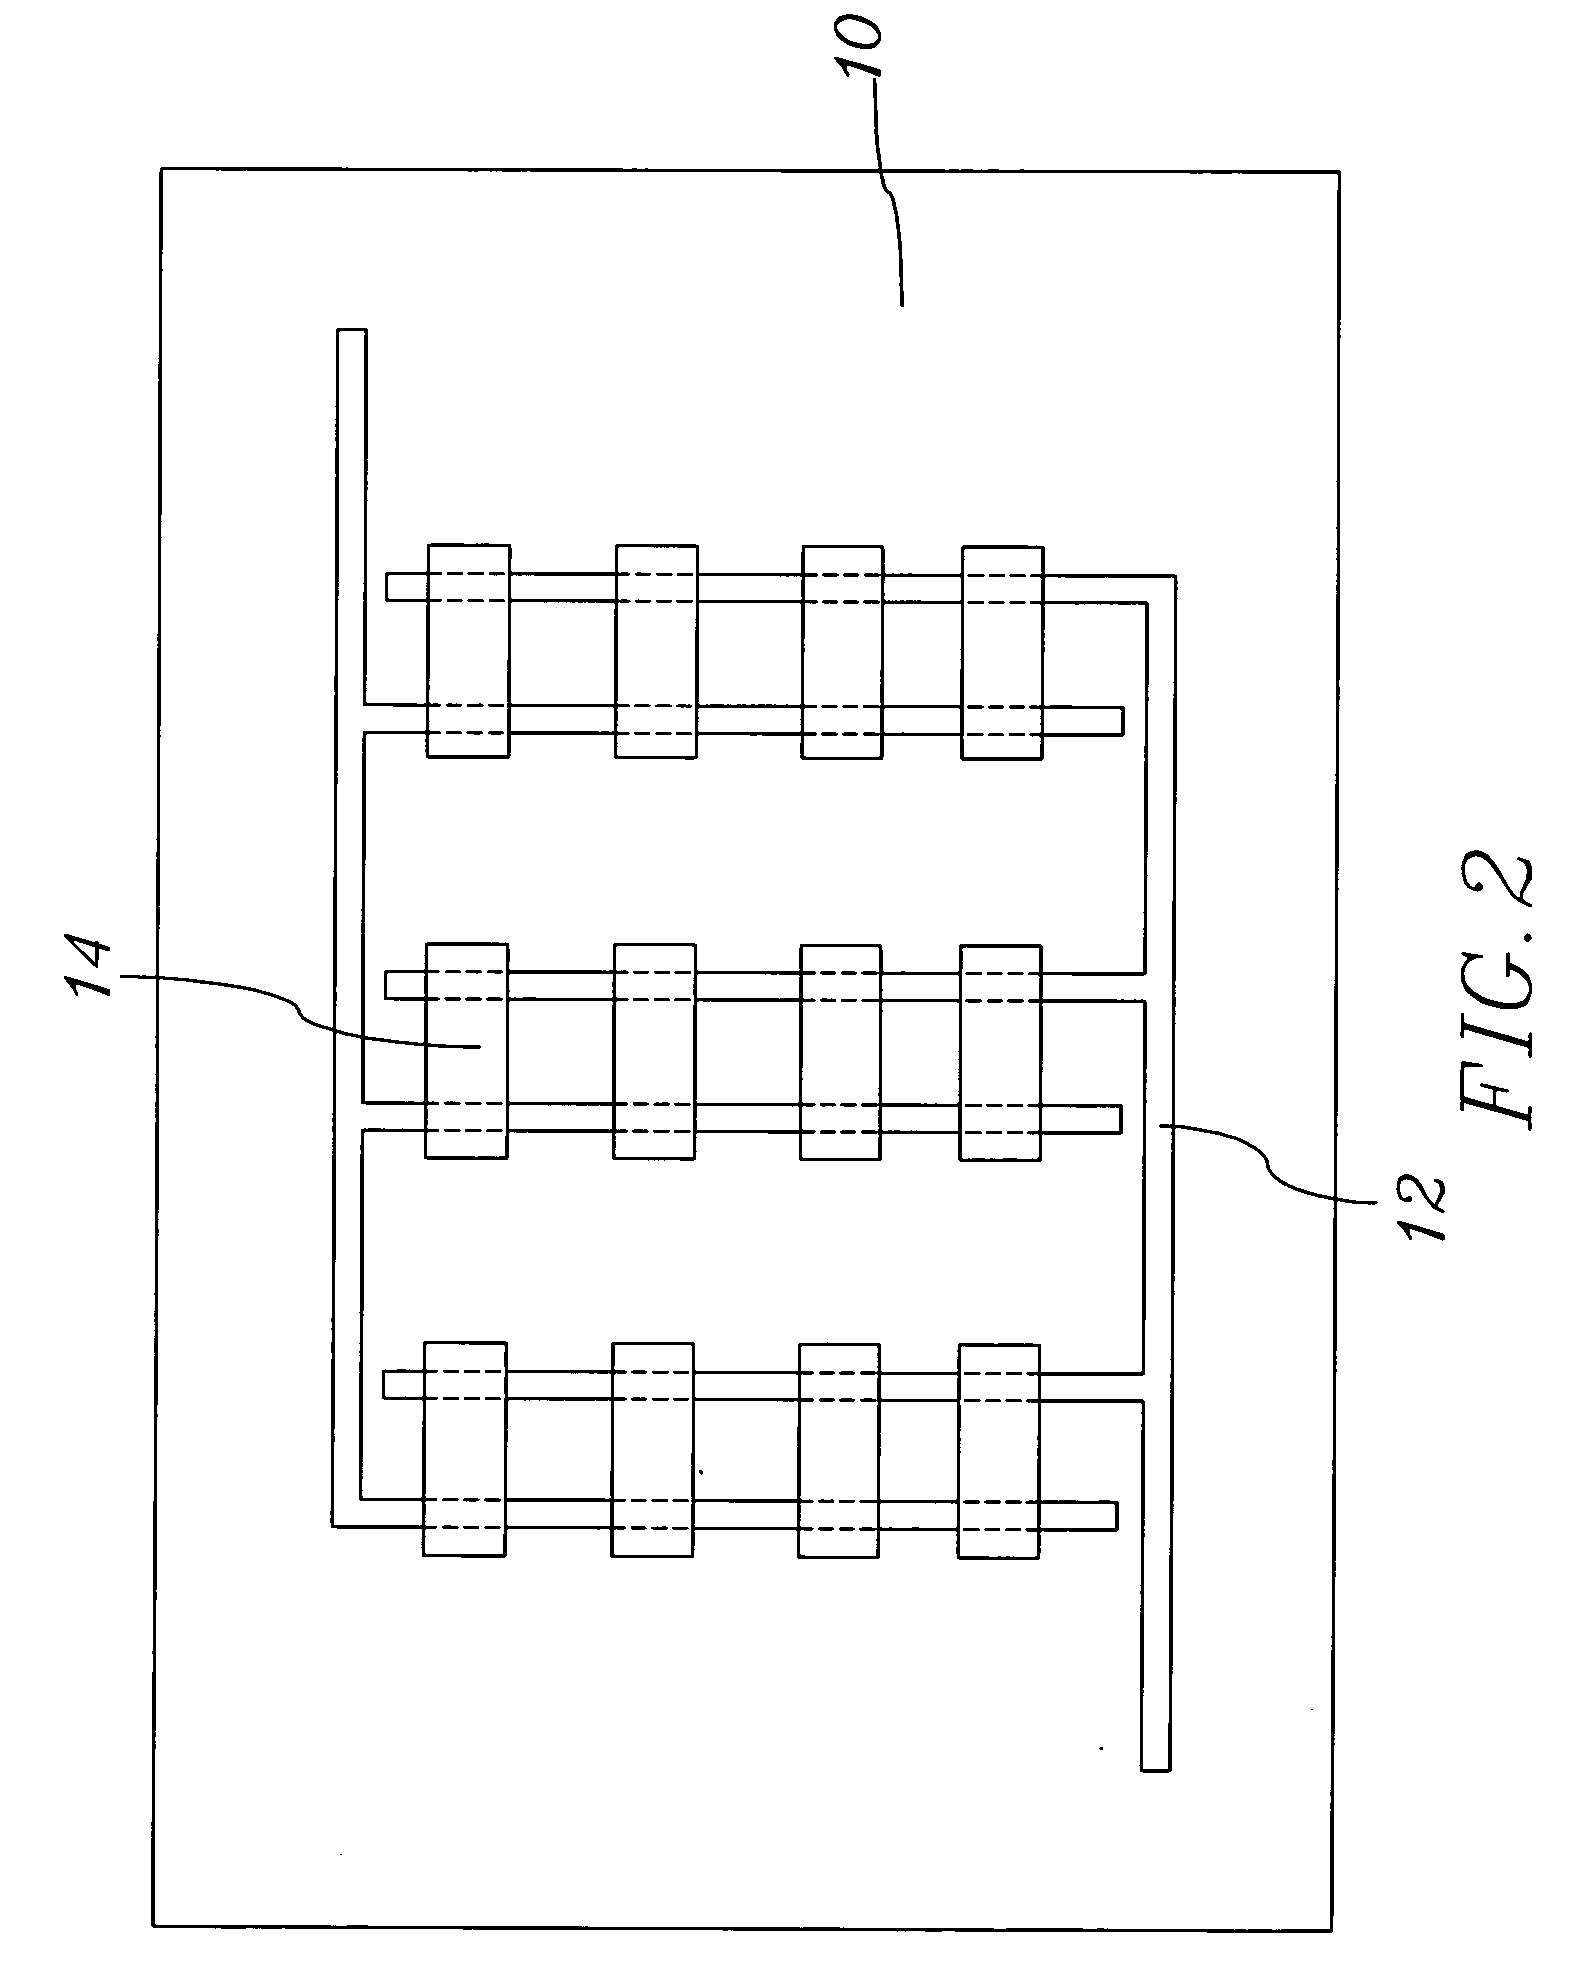 Package array and package unit of flip chip LED